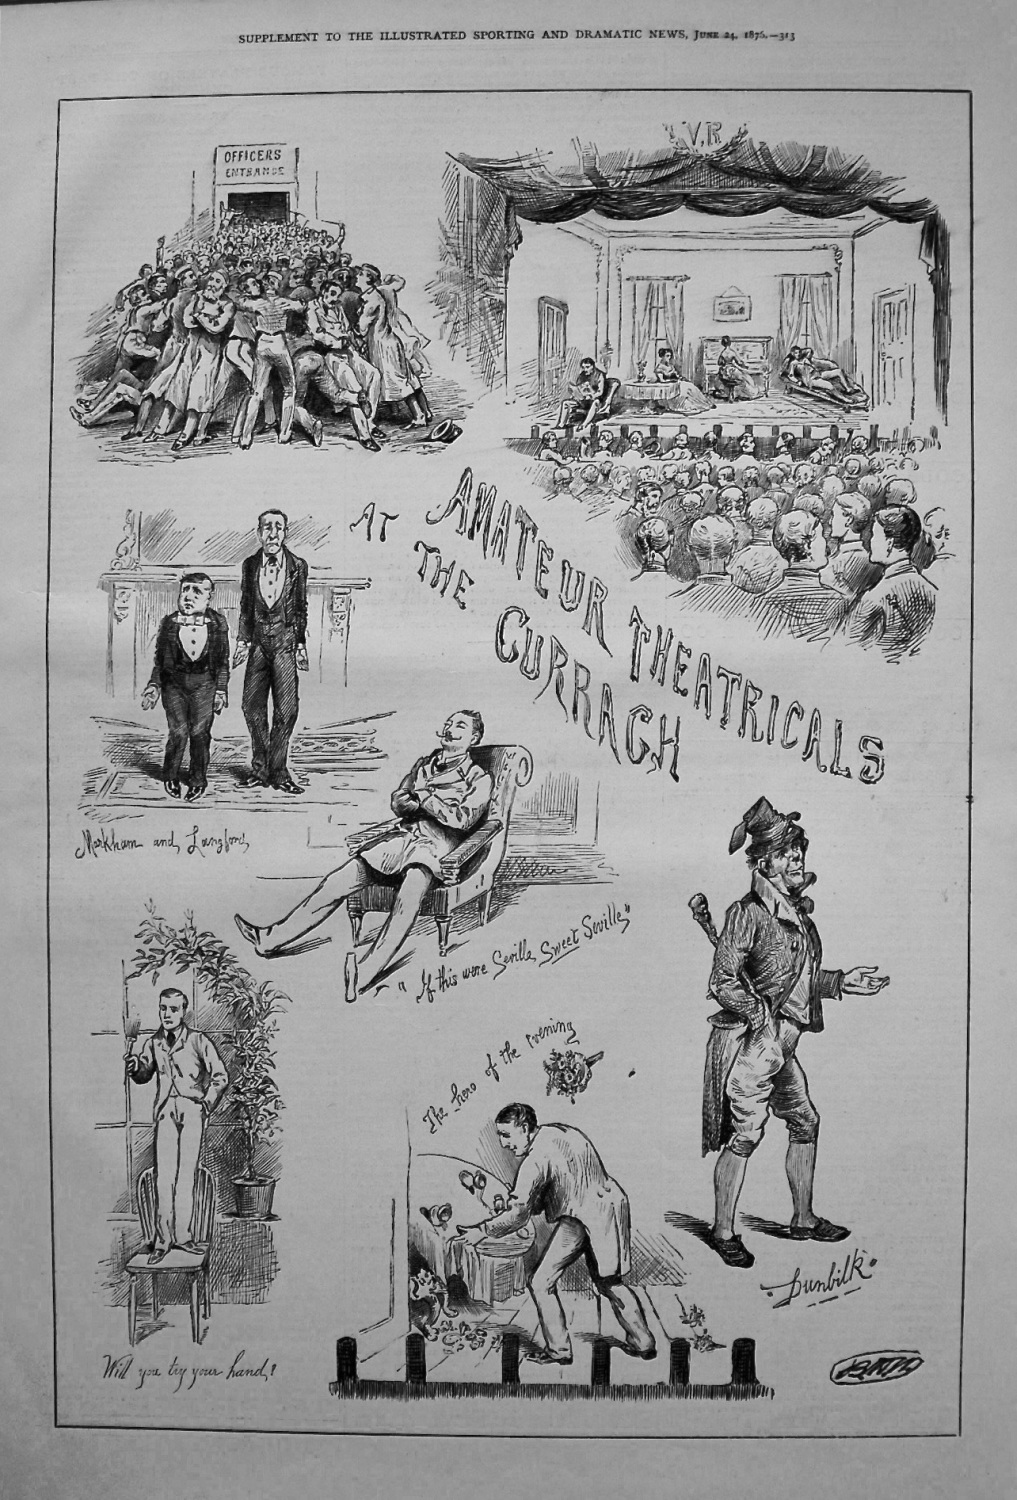 Amateur Theatricals at the Curragh. 1876